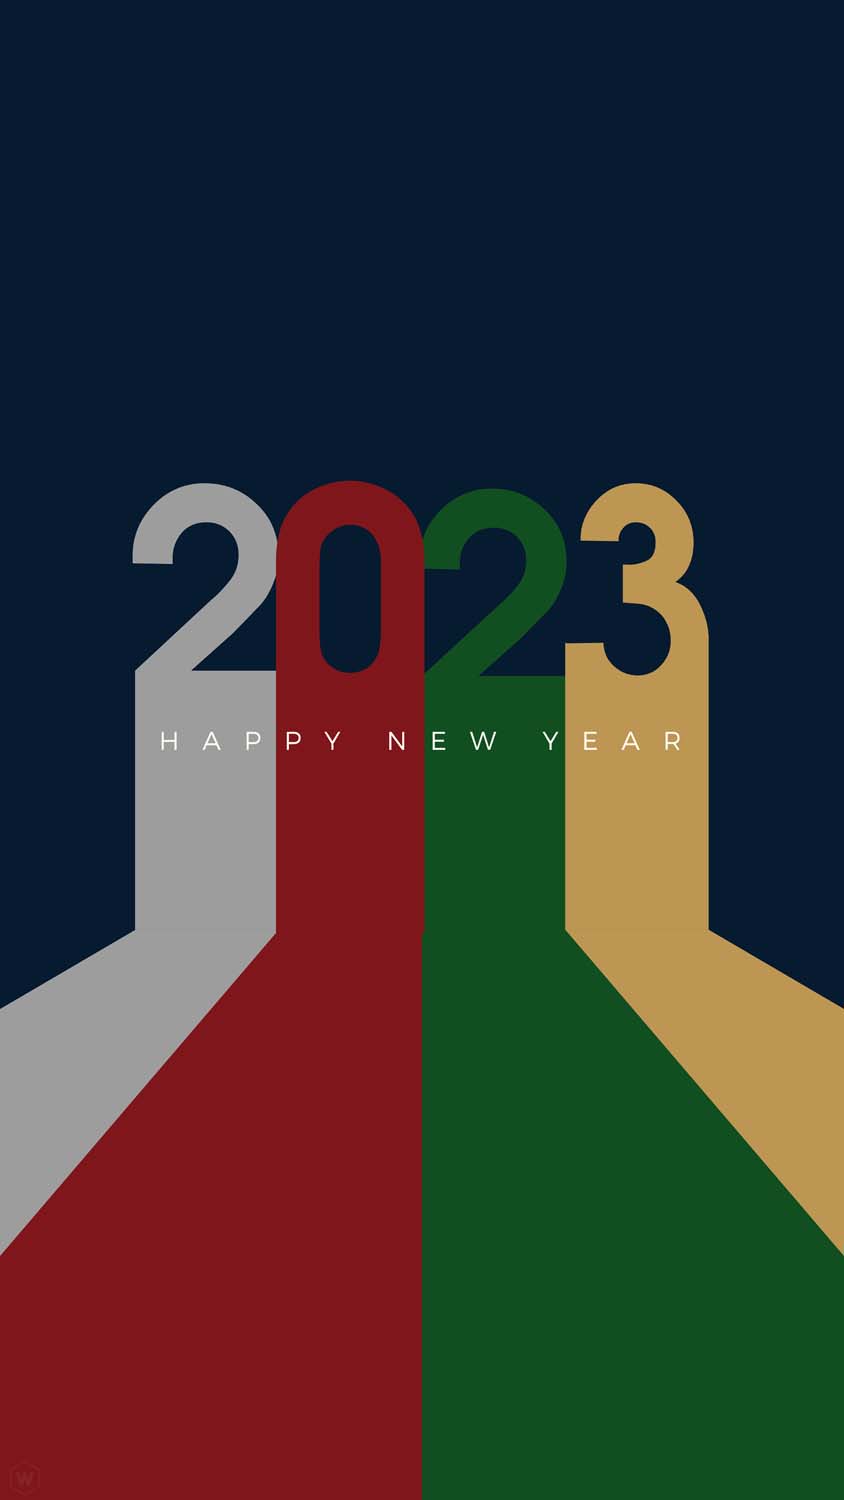 2023 Happy New Year iPhone Wallpaper HD 1